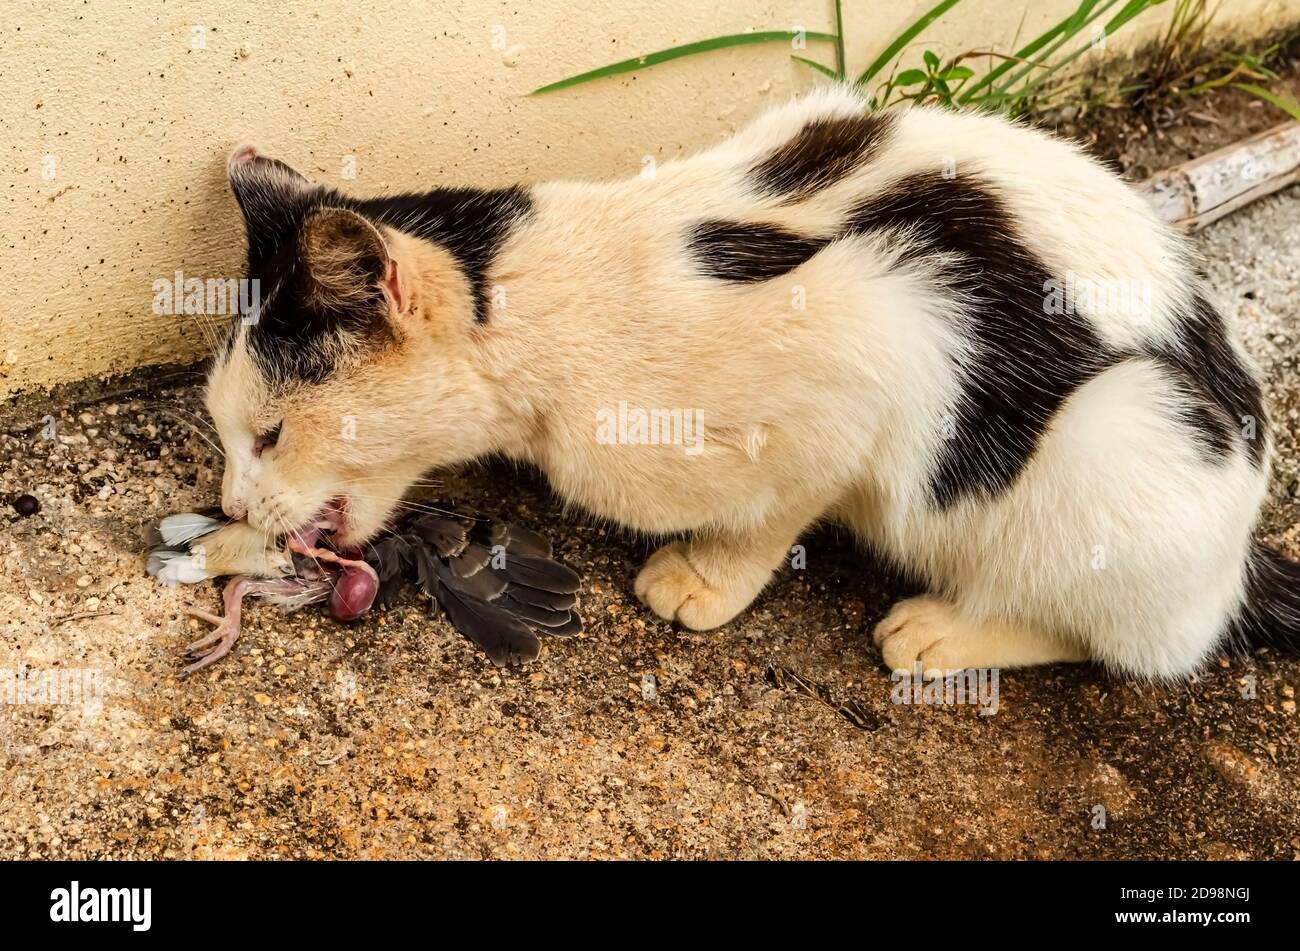 A Lemur cat crouches on a concrete pavement close to a wall while eating a bird she caught. Stock Photo